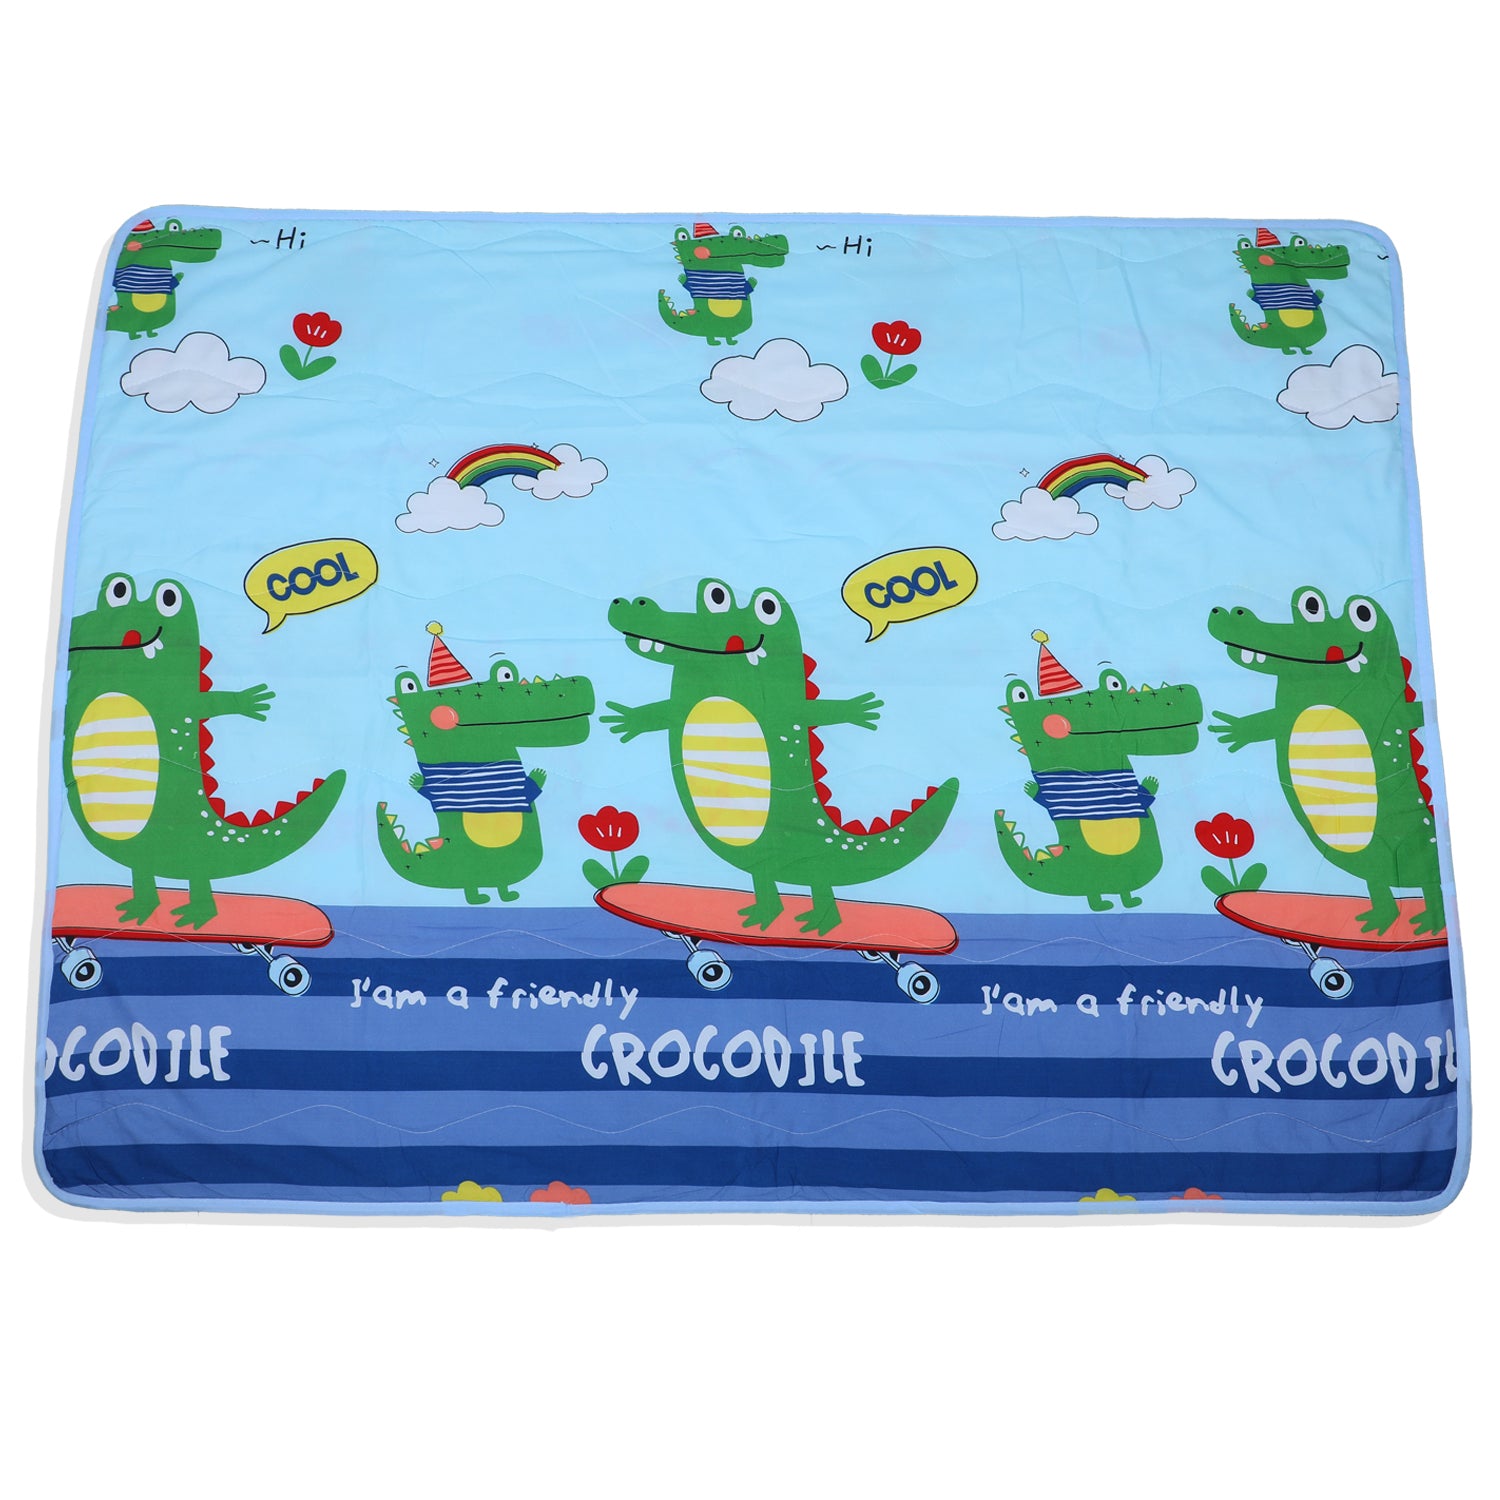 Baby Moo Cool Crocodile Soft Quilted Premium Reversible Blanket - Blue - Baby Moo